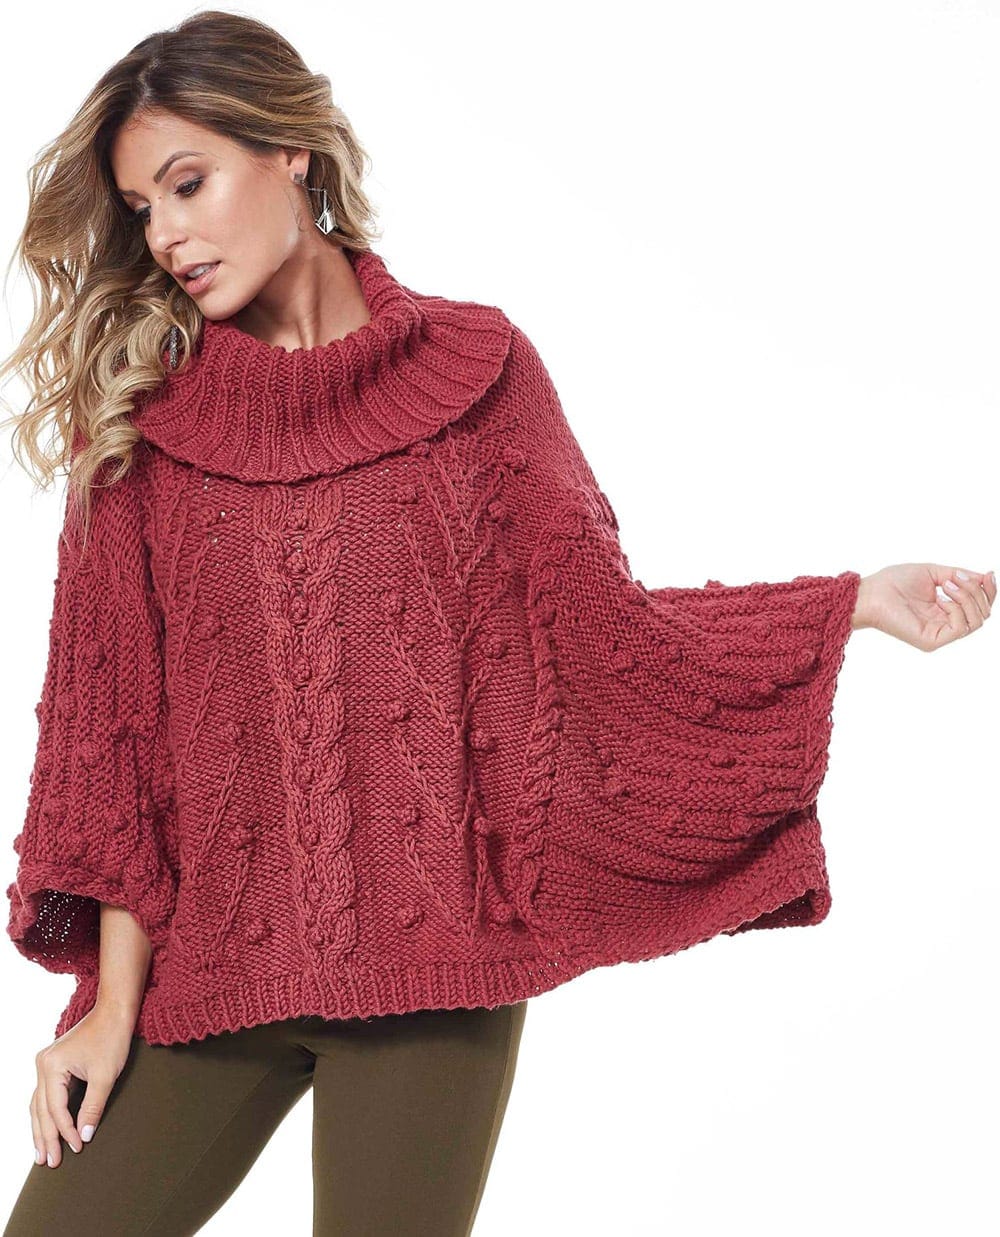 Free Knitting Patterns - Poncho Sweater with Centre Cable